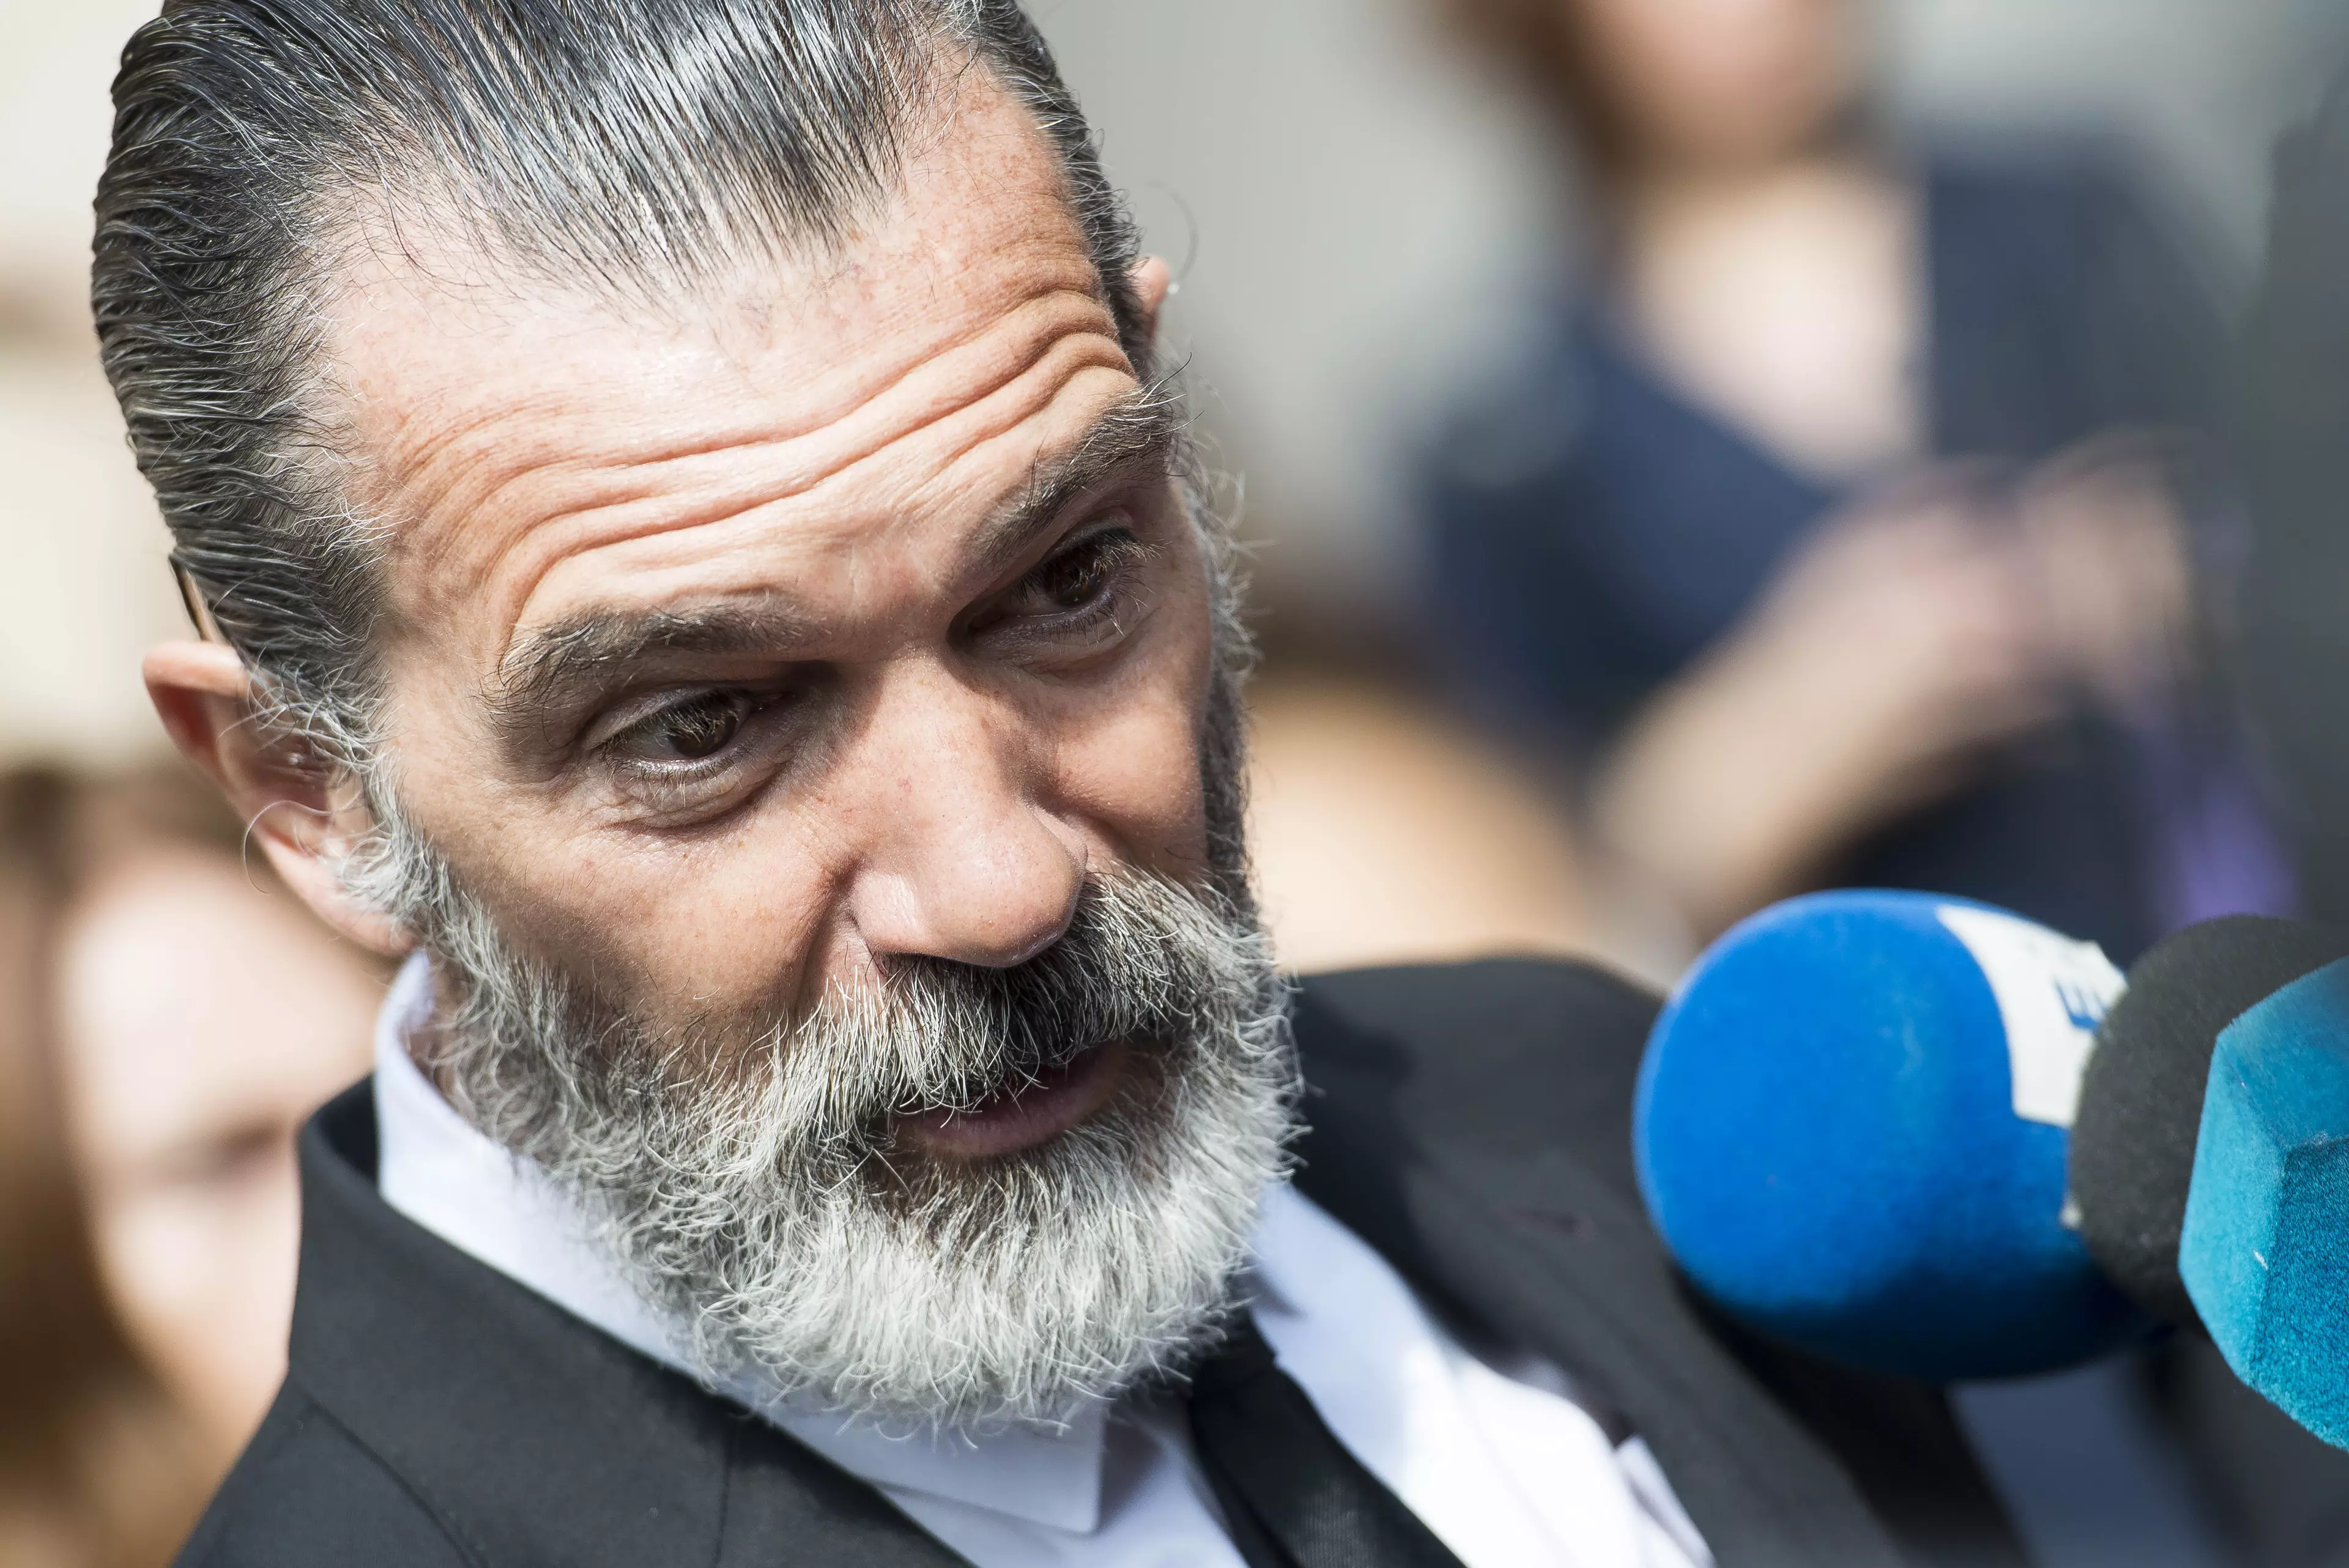 Antonio Banderas Looks Very Different After Shaving Off His Hair And Eyebrows